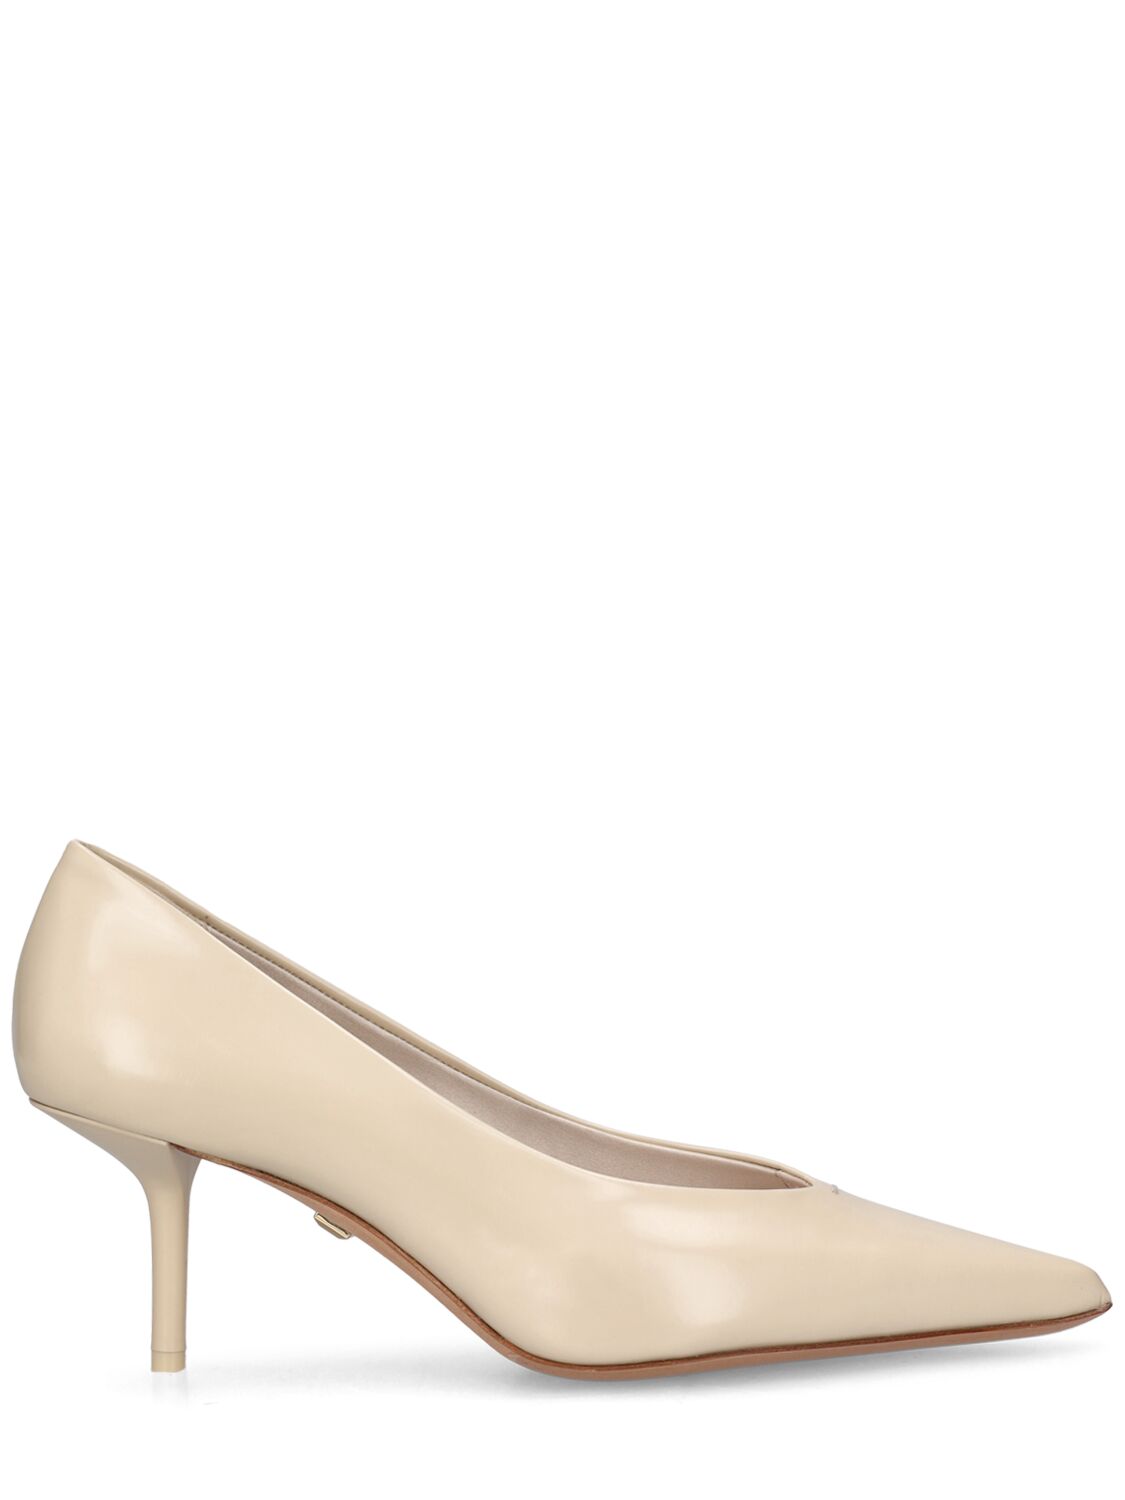 Max Mara 65mm Leather Pumps In Ivory